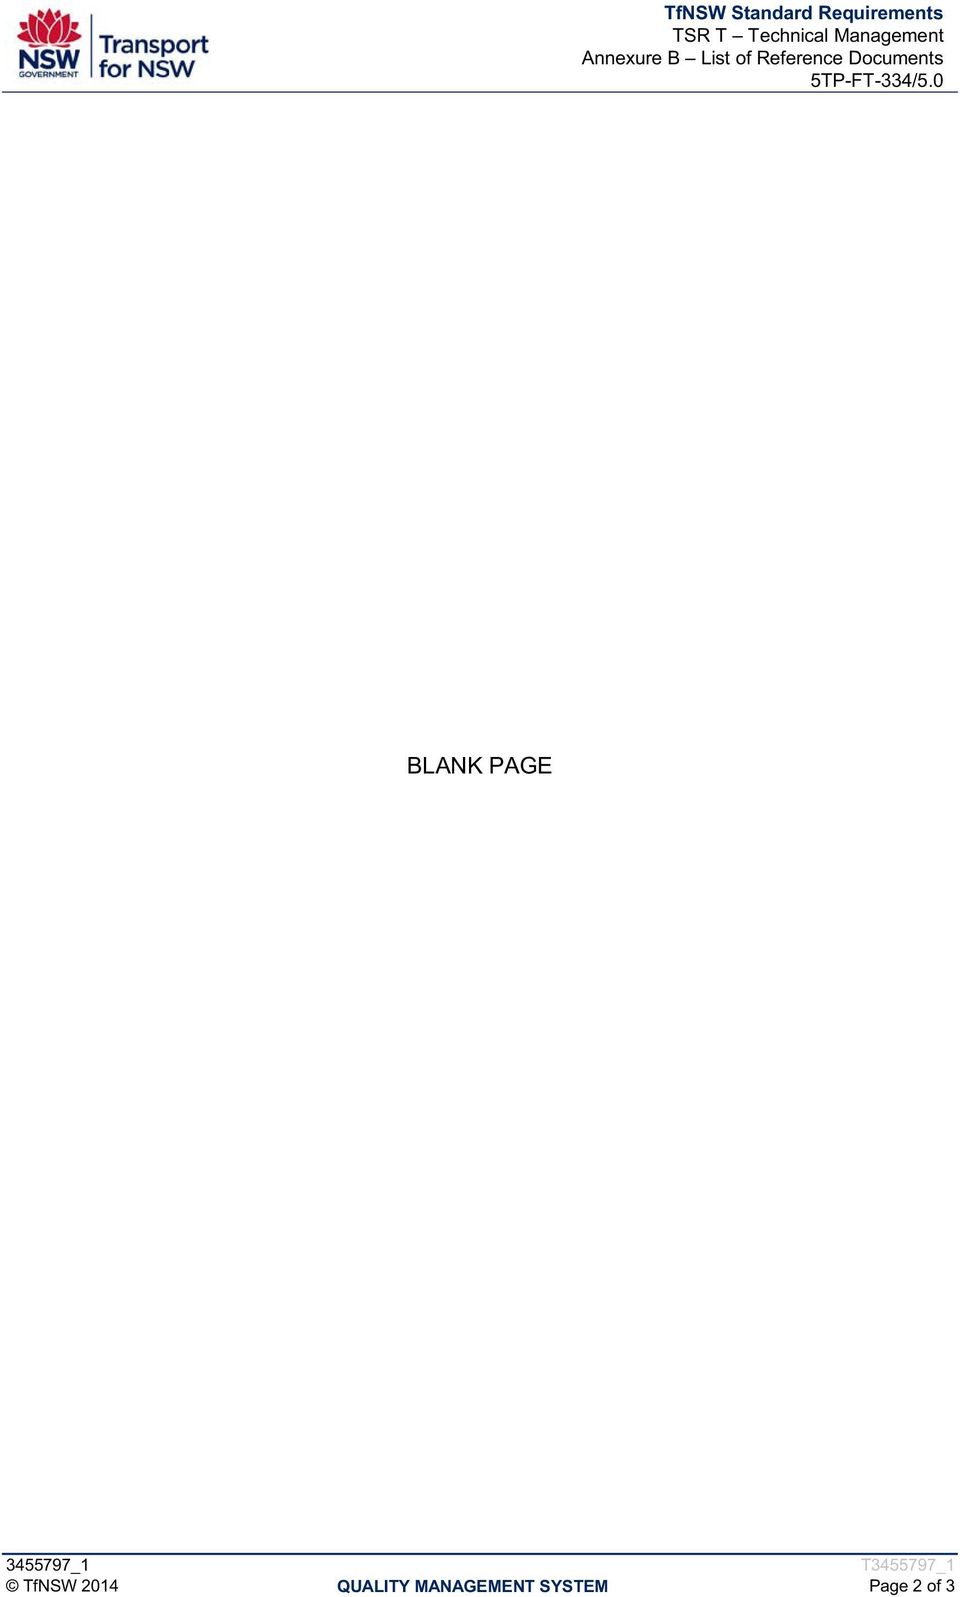 BLANK PAGE TfNSW 2014